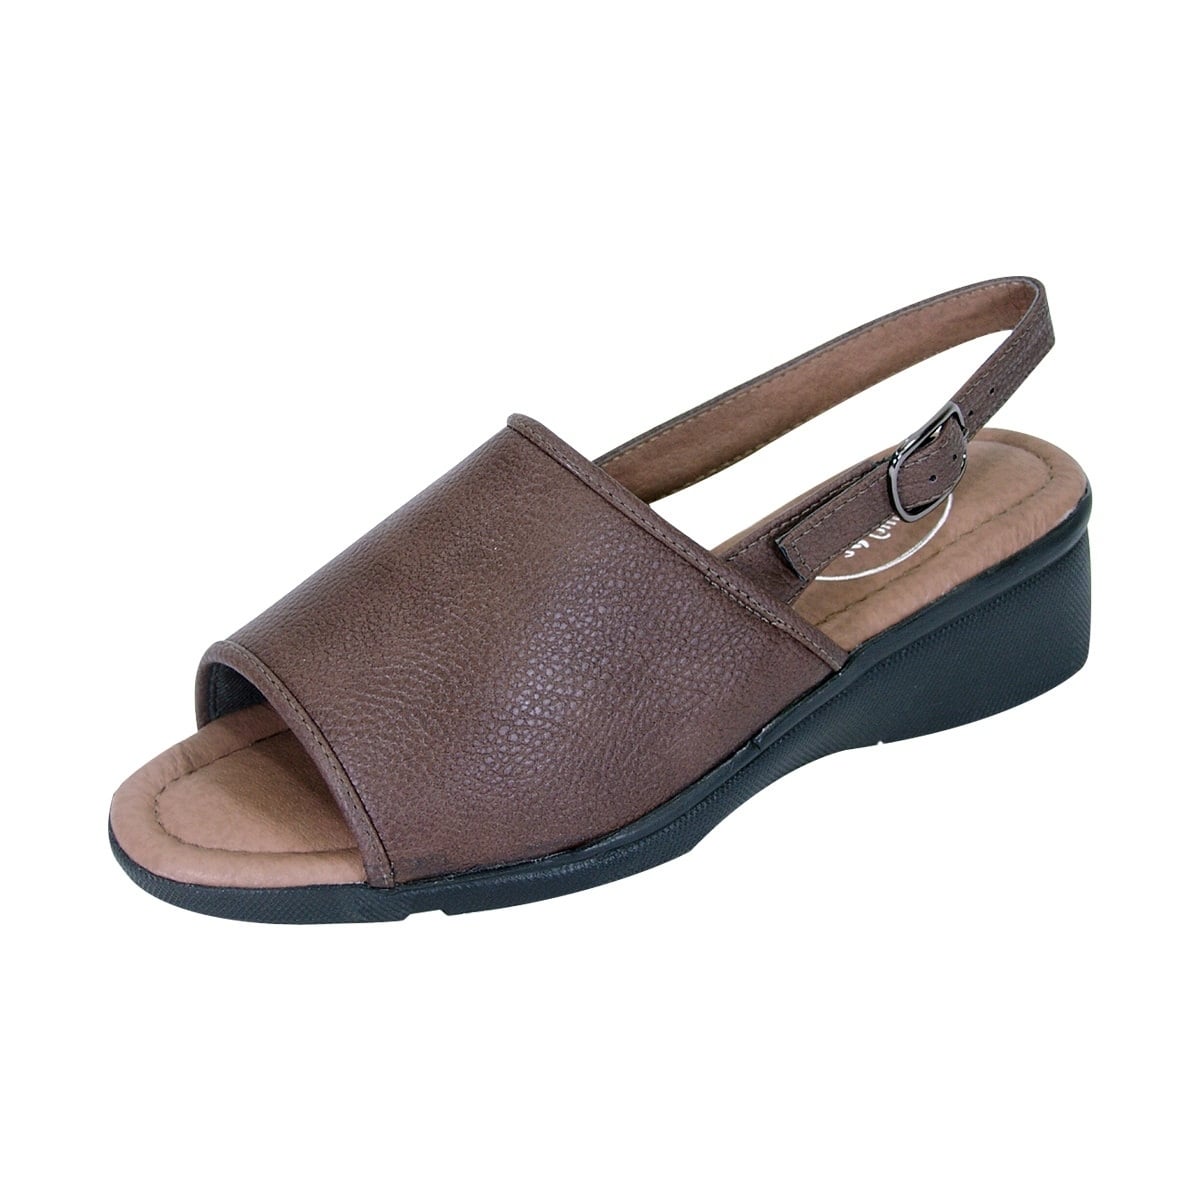 extra extra wide womens sandals